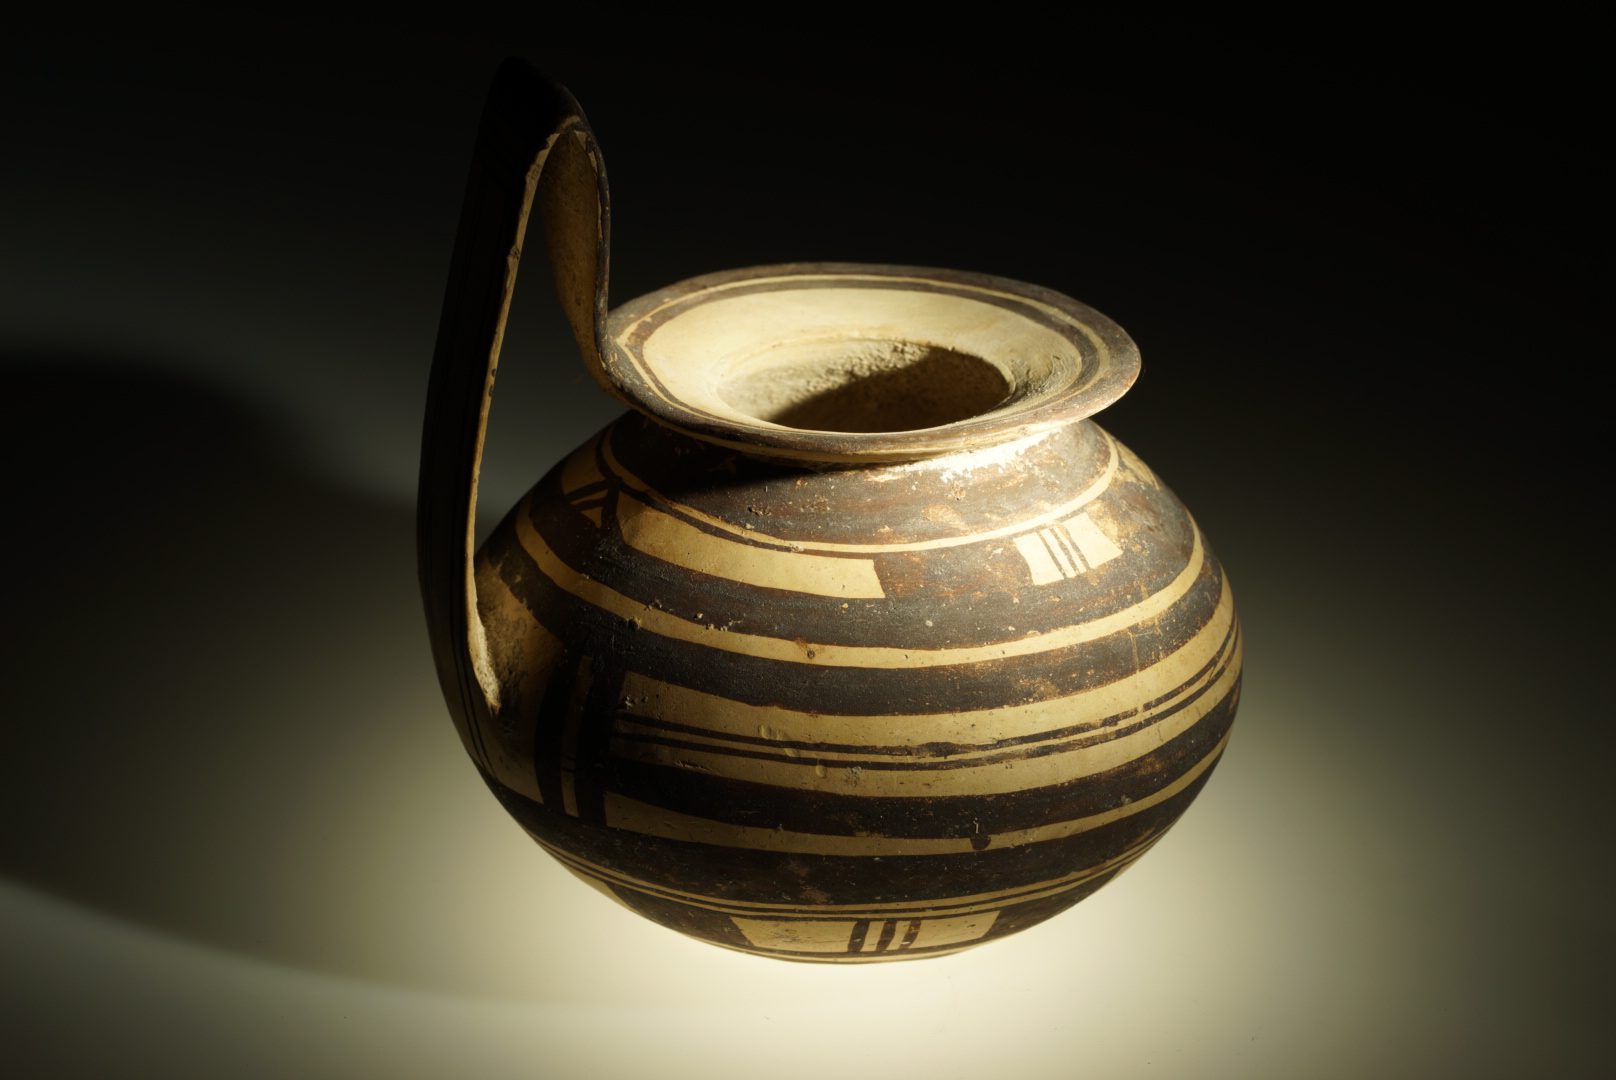 Professional photograph for galleries of Daunian pottery after conservation